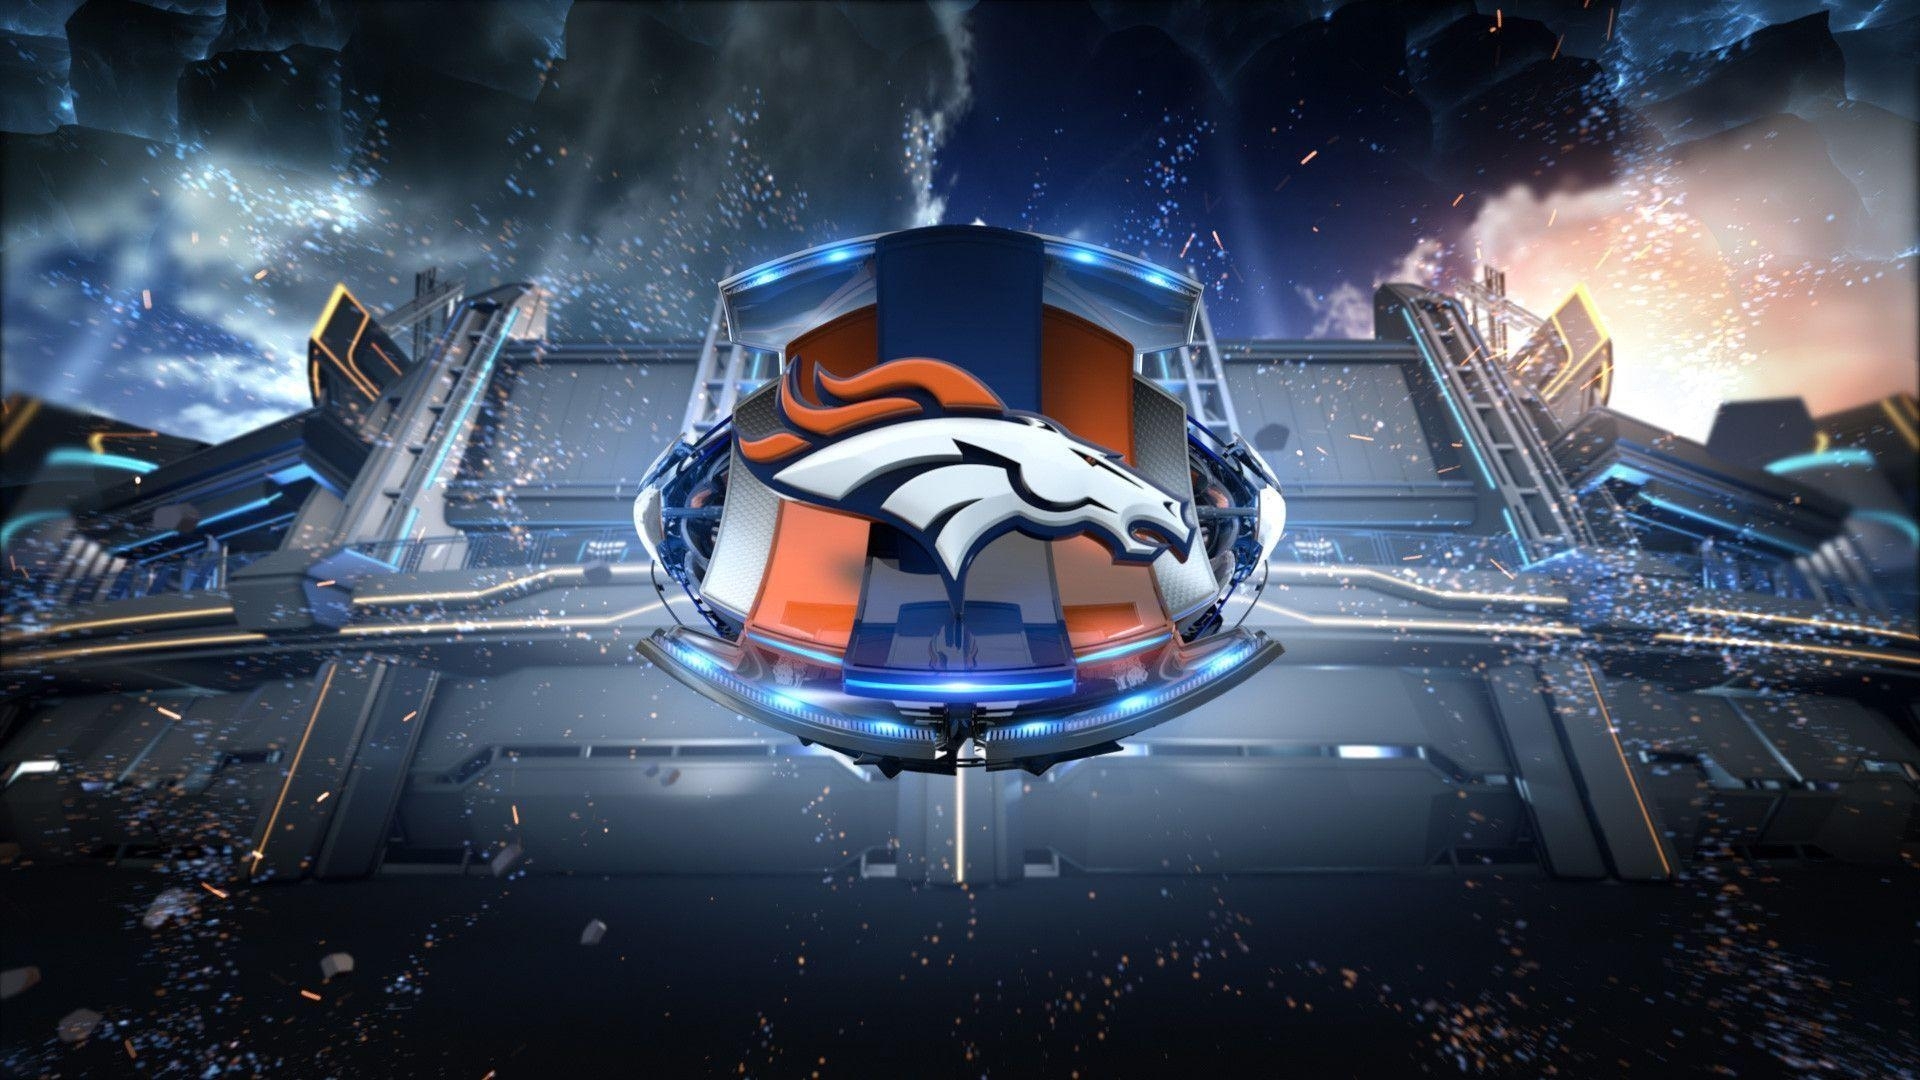 10 New Denver Broncos Hd Wallpapers FULL HD 1080p For PC Background